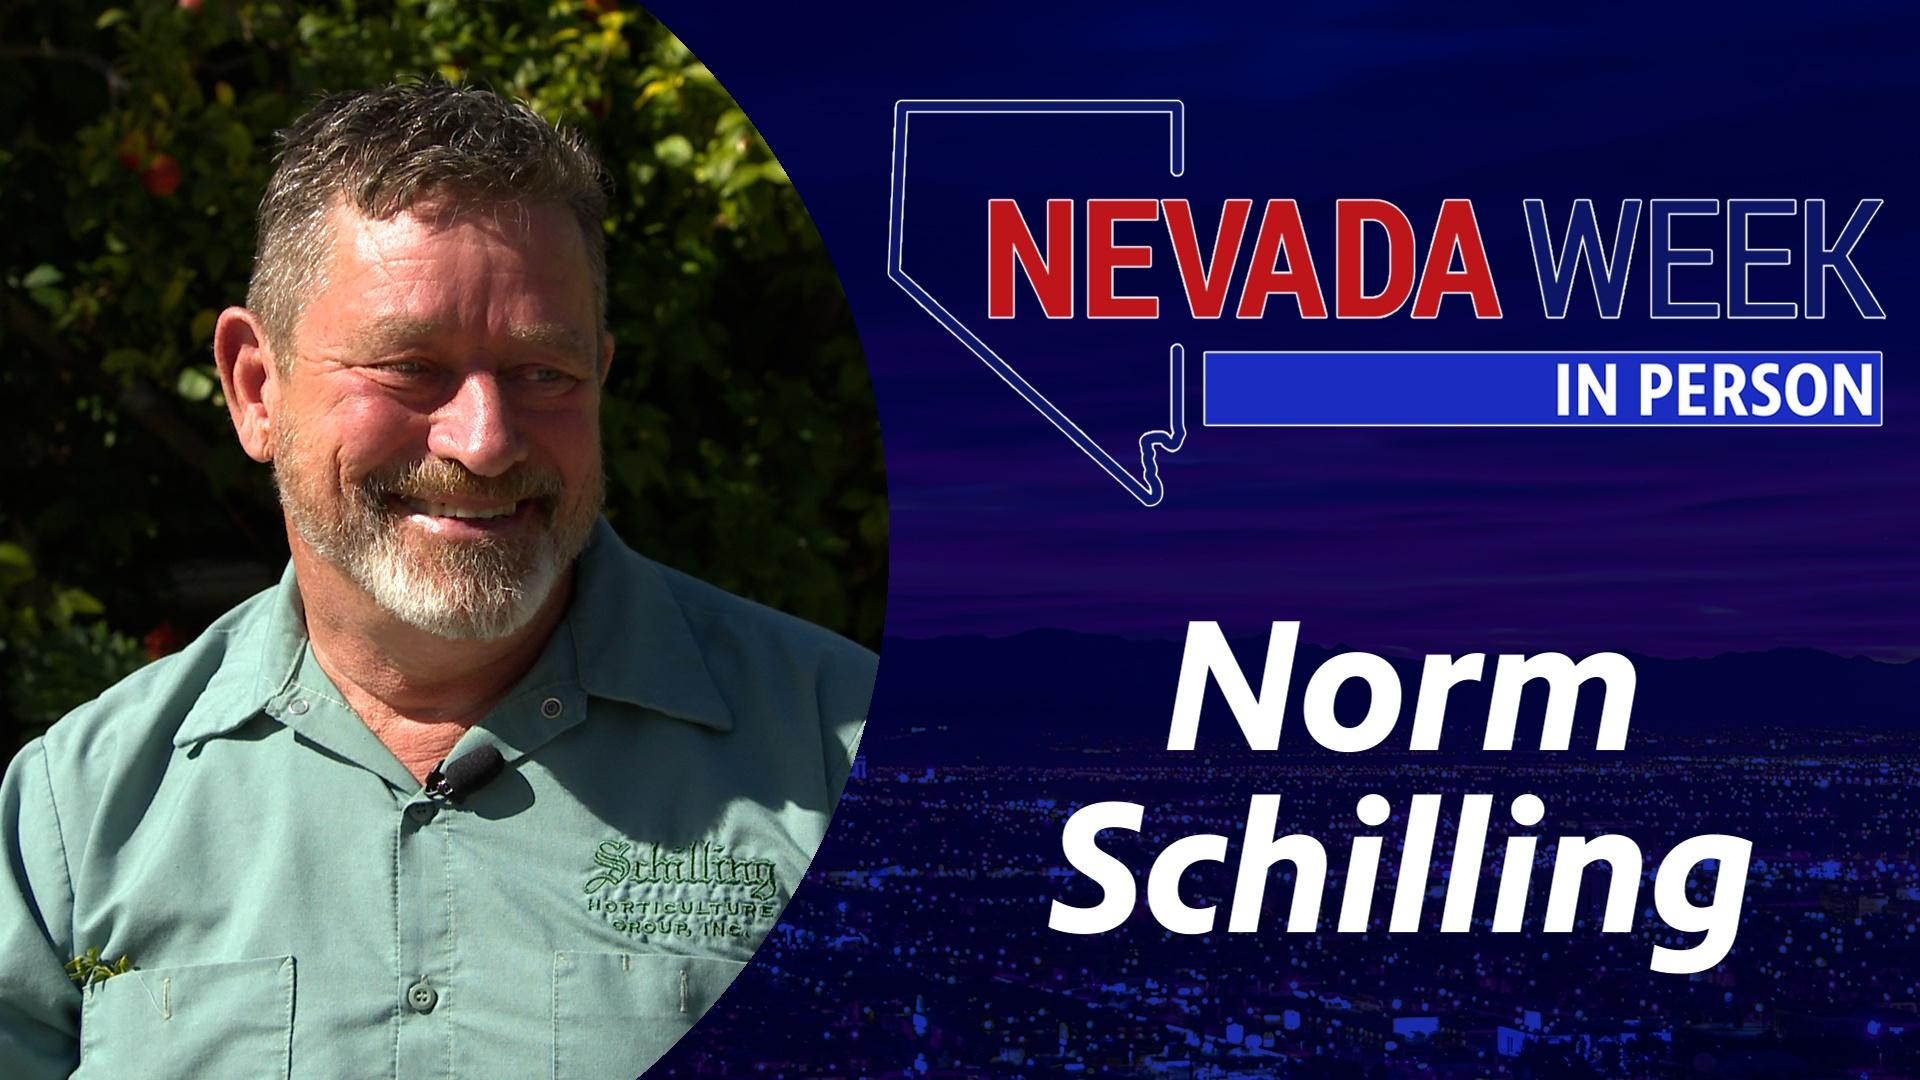 Nevada Week In Person | Norm Schilling